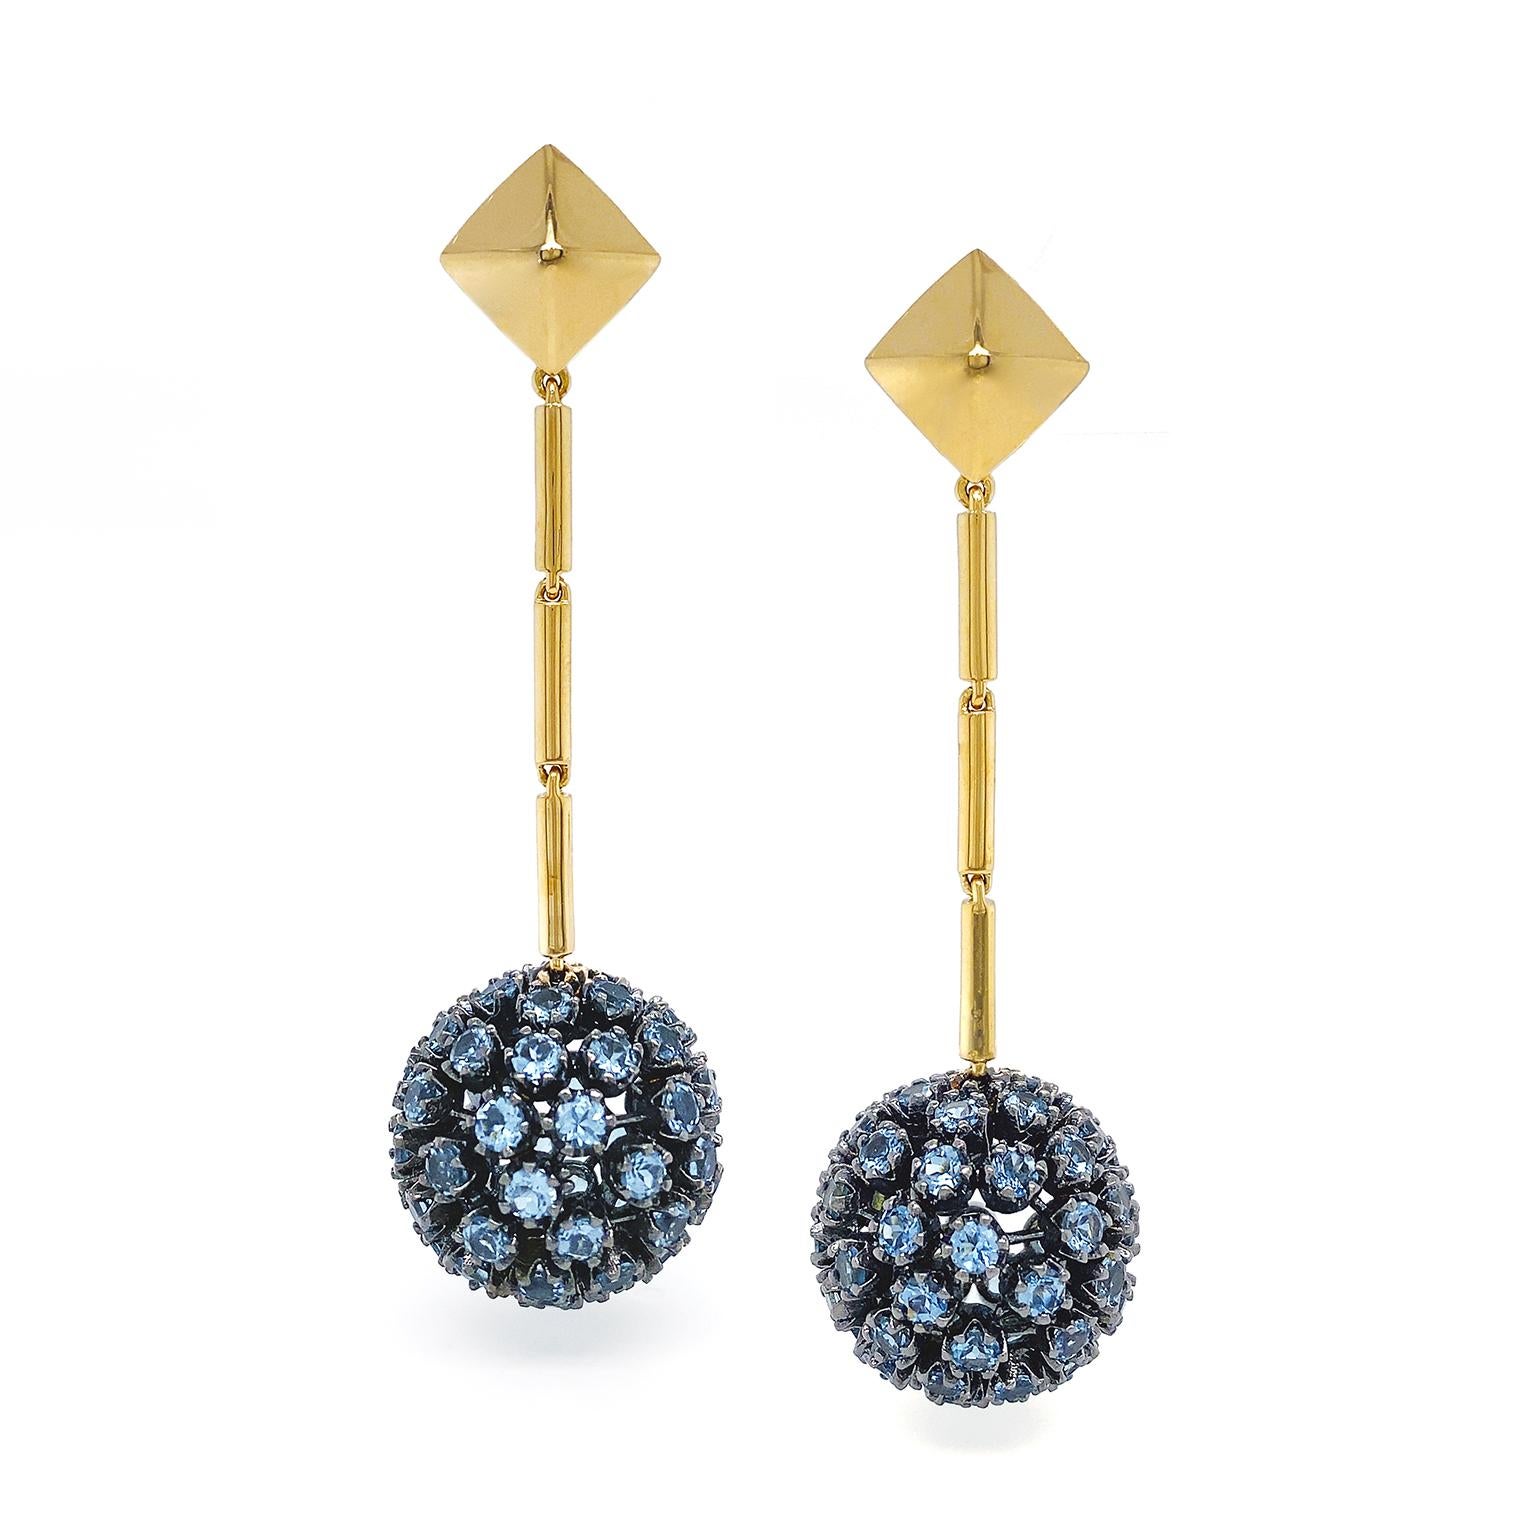 Coruscating light of aquamarine is showcased in these elegant drop earrings. The design begins with an 18k yellow gold pyramid, which connects to a row of three slender bars. Next, against the black rhodium setting, a globe suspends embellished with